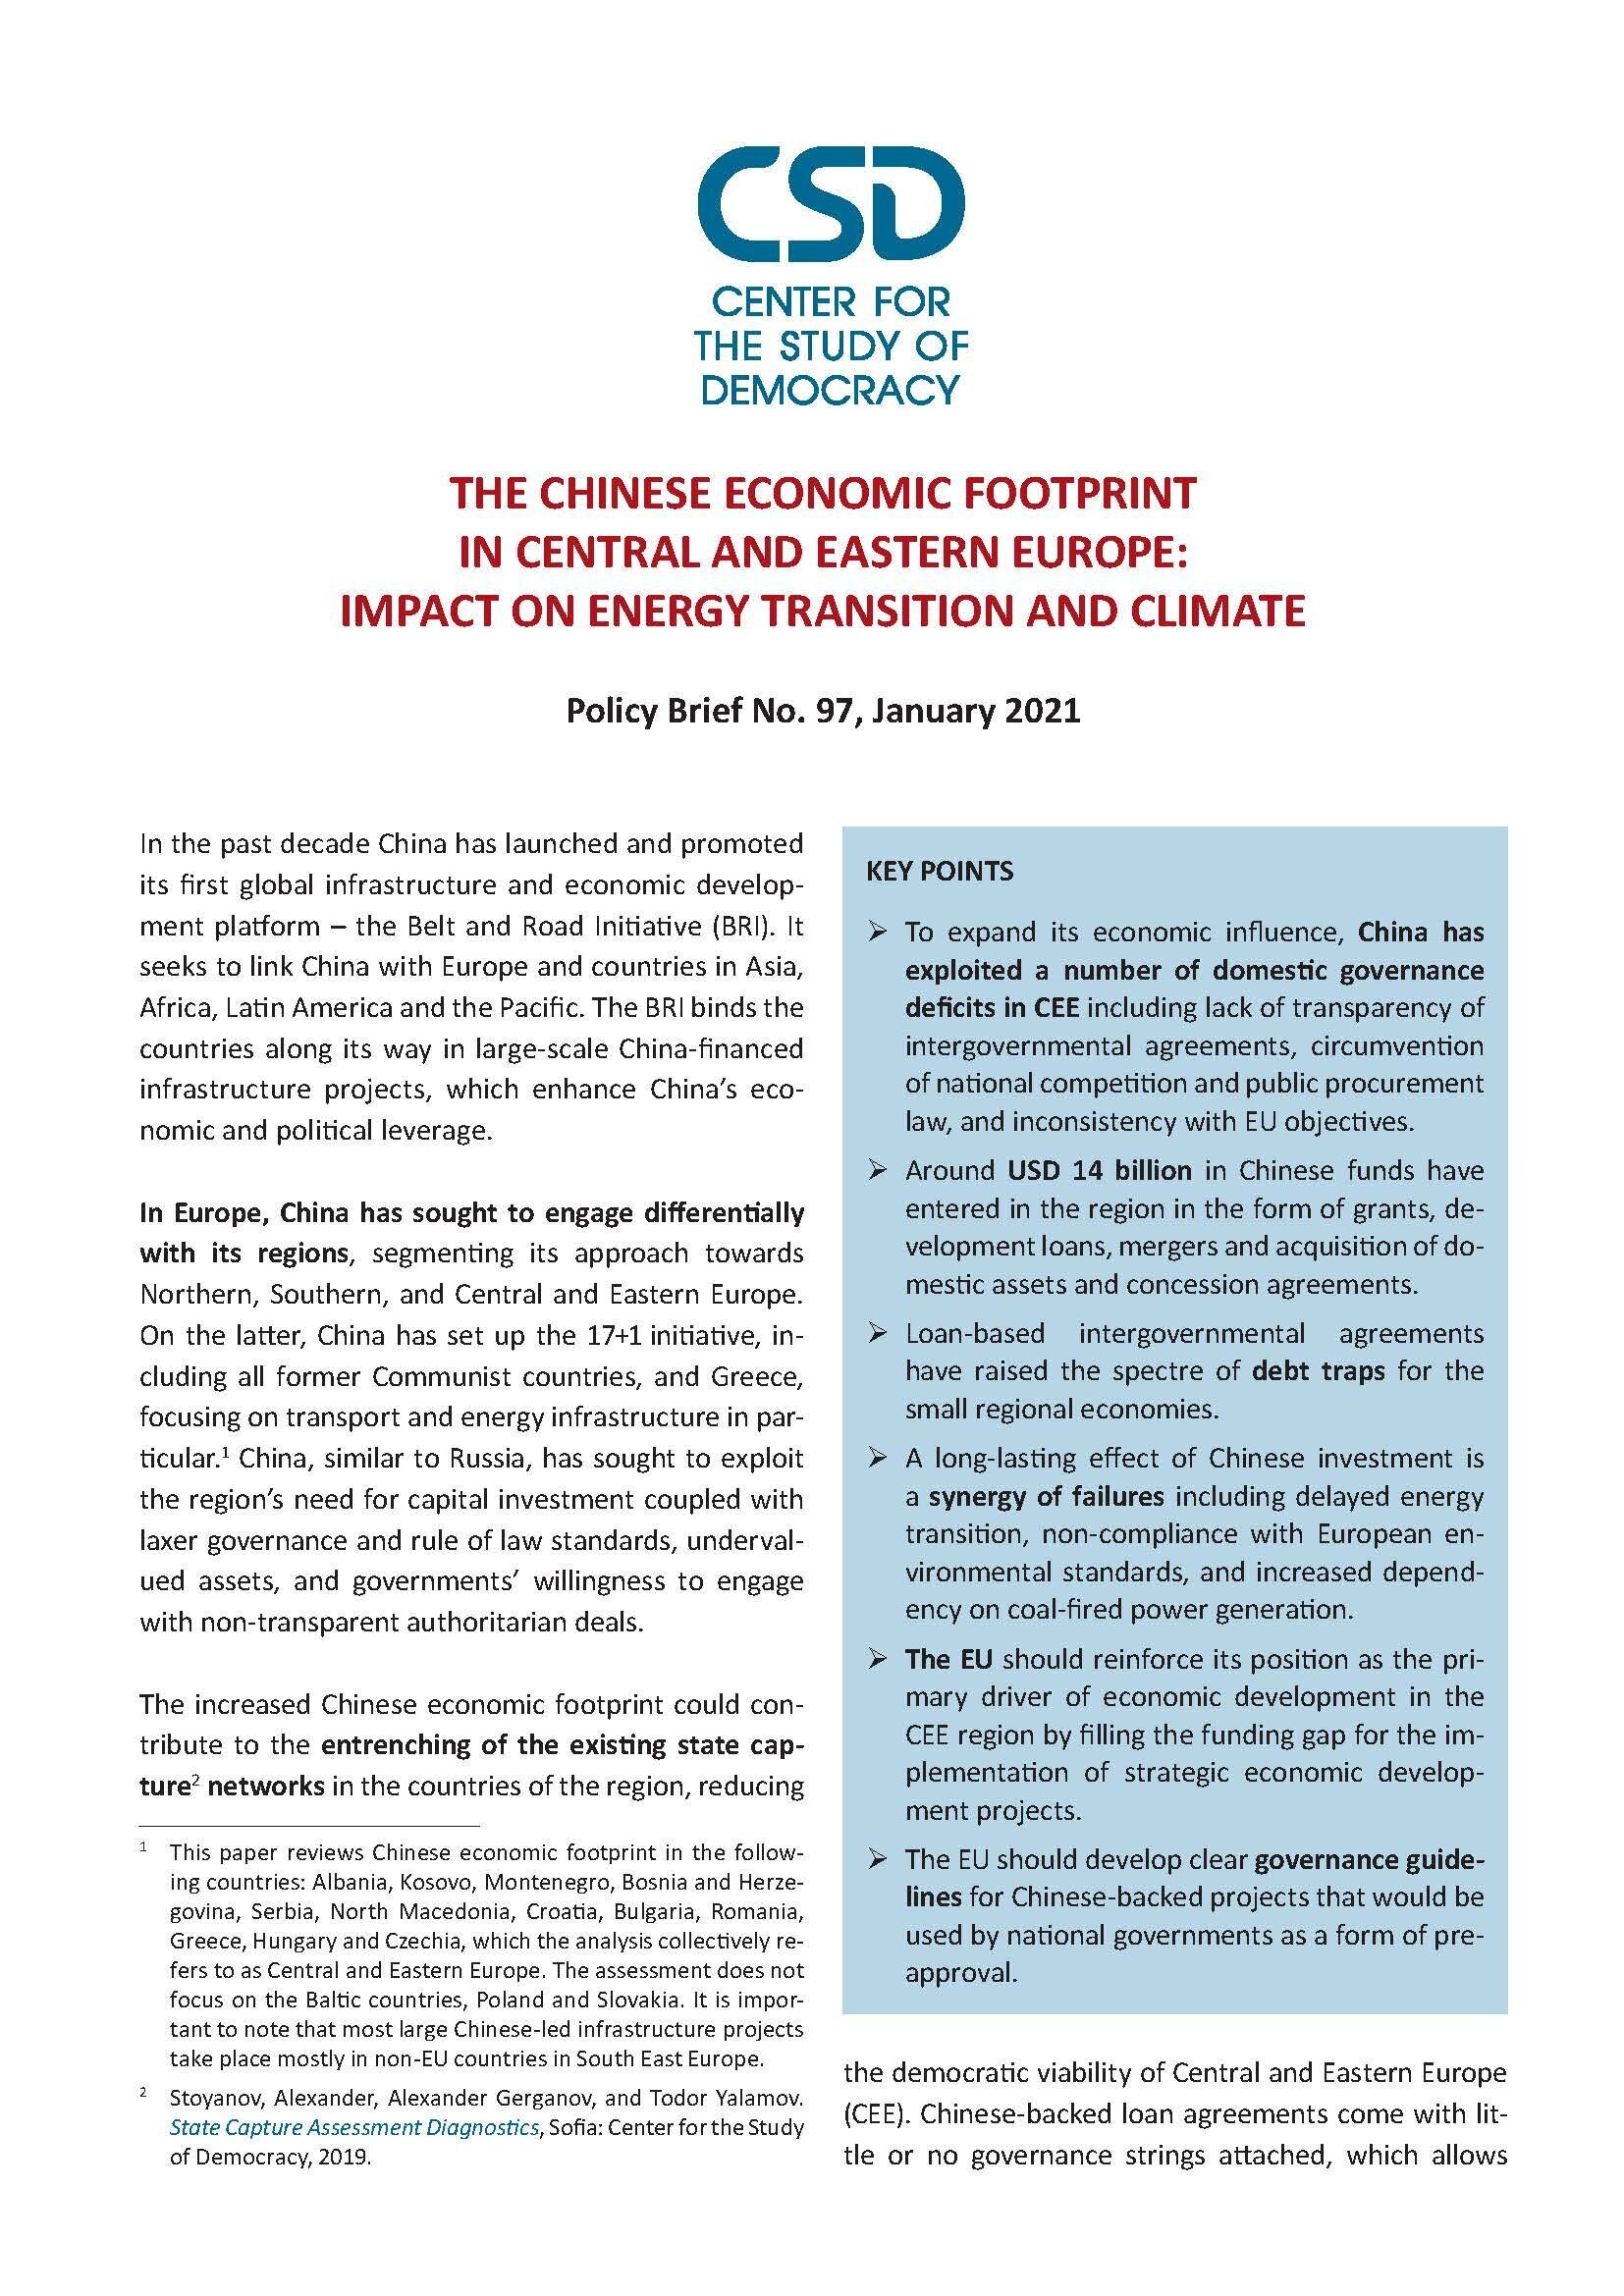 The Chinese Economic Footprint in Central and Eastern Europe:Impact on Energy Transition and Climate